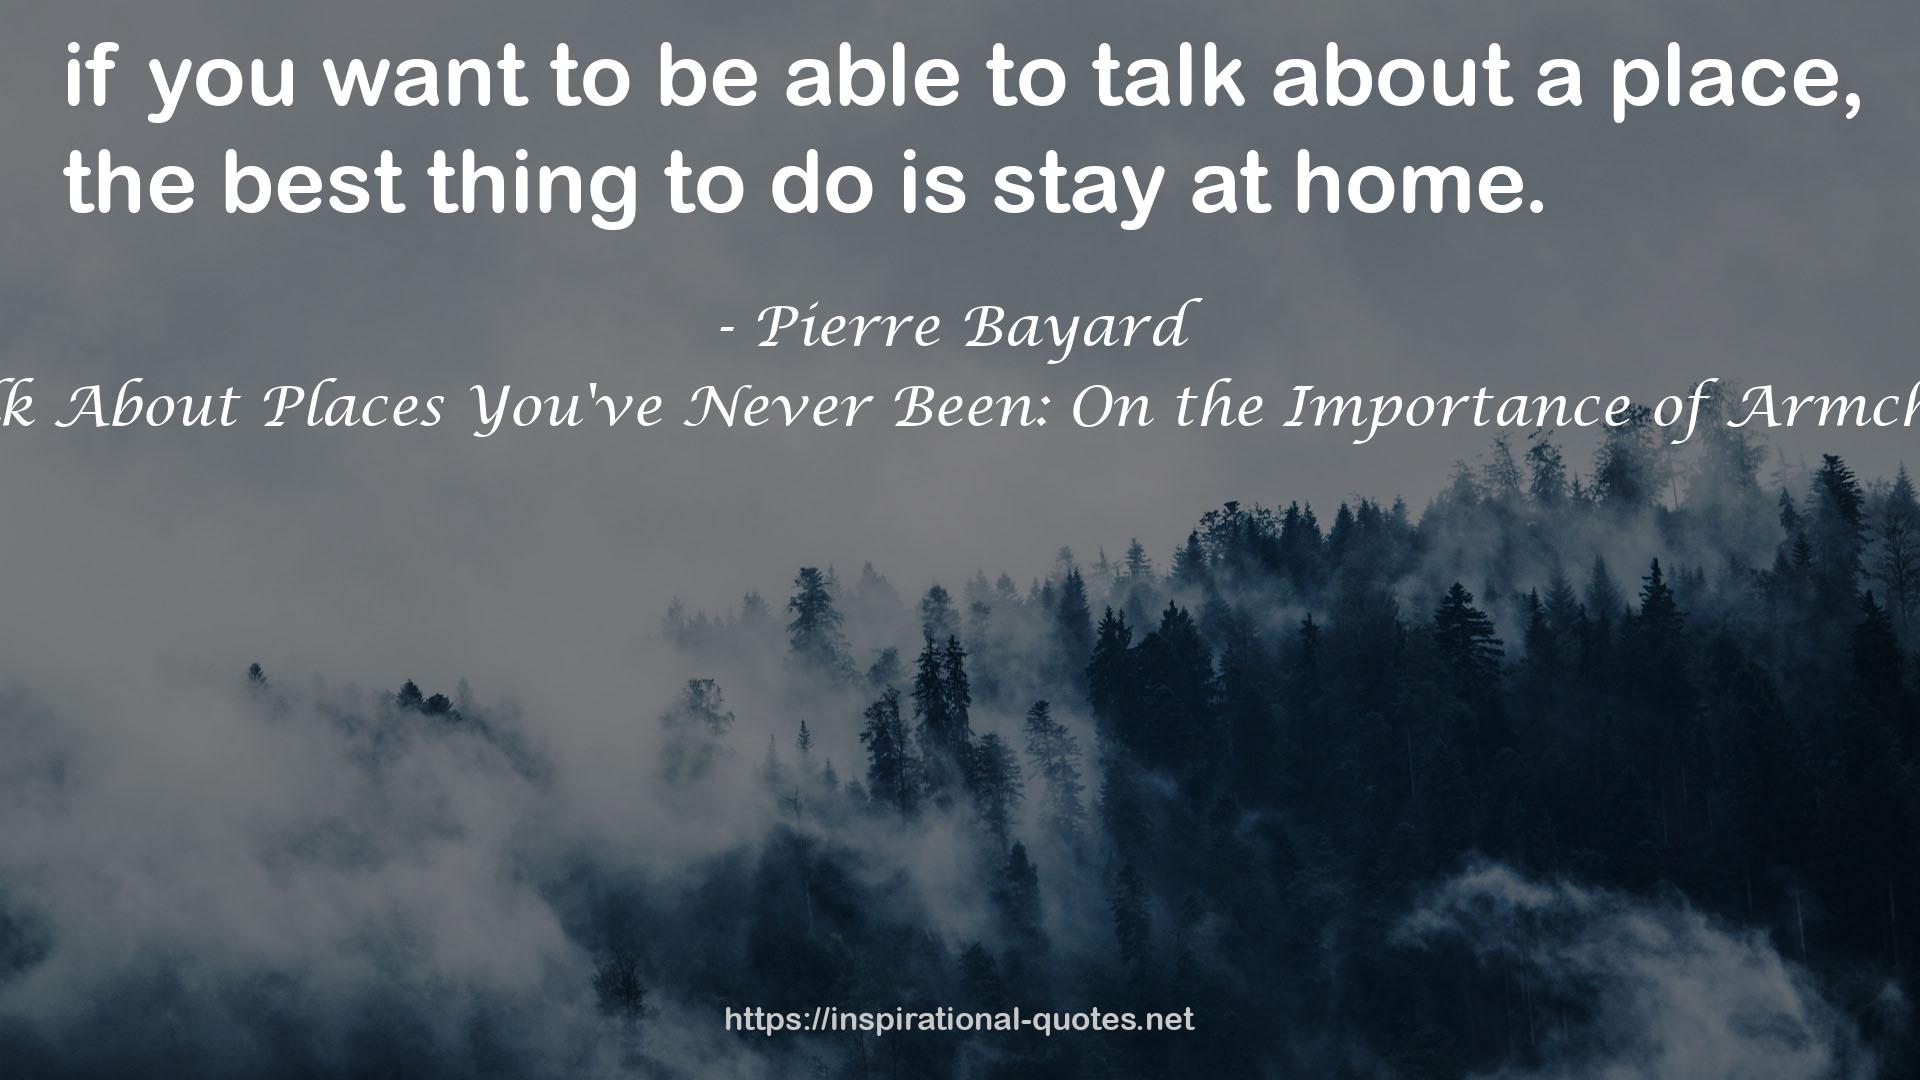 How to Talk About Places You've Never Been: On the Importance of Armchair Travel QUOTES